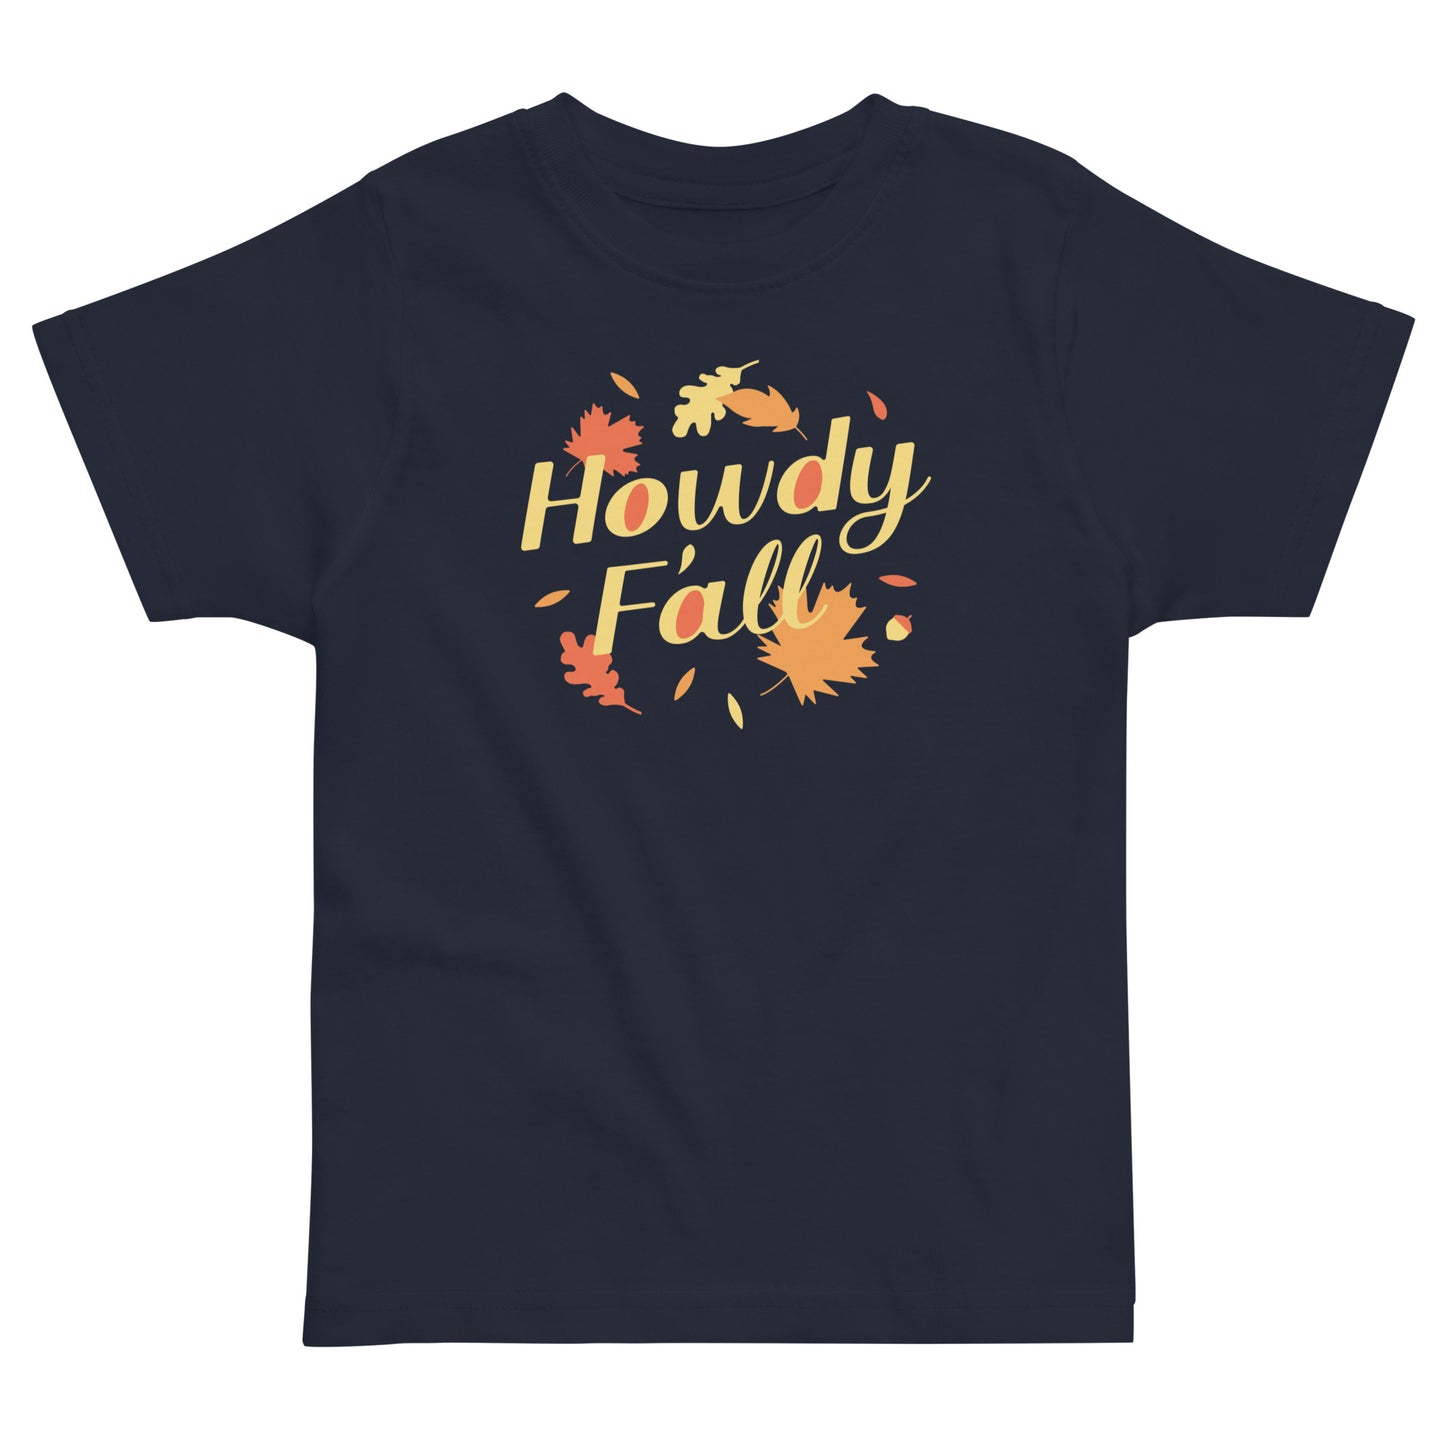 Howdy F'all Kid's Toddler Tee